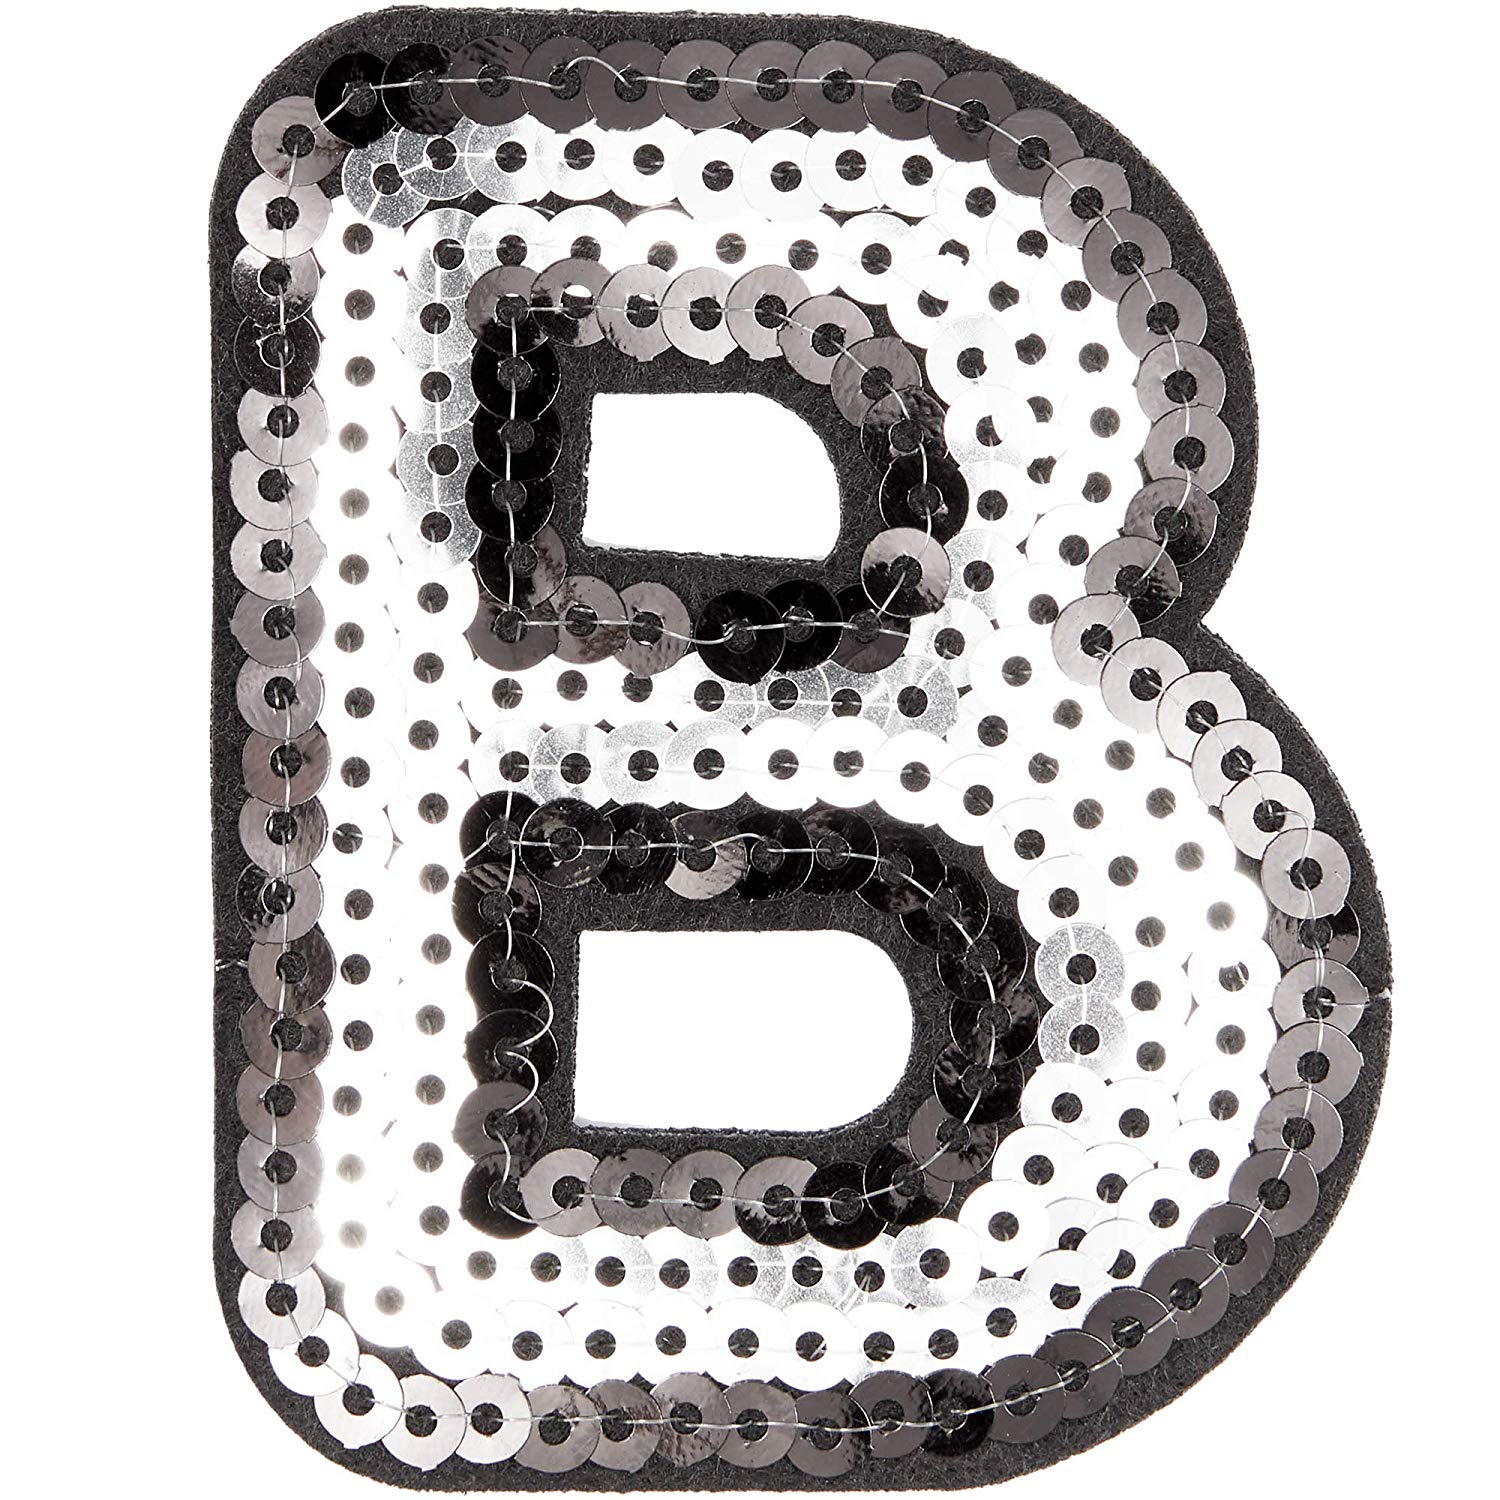 Iron-On Glitter Letters Silver